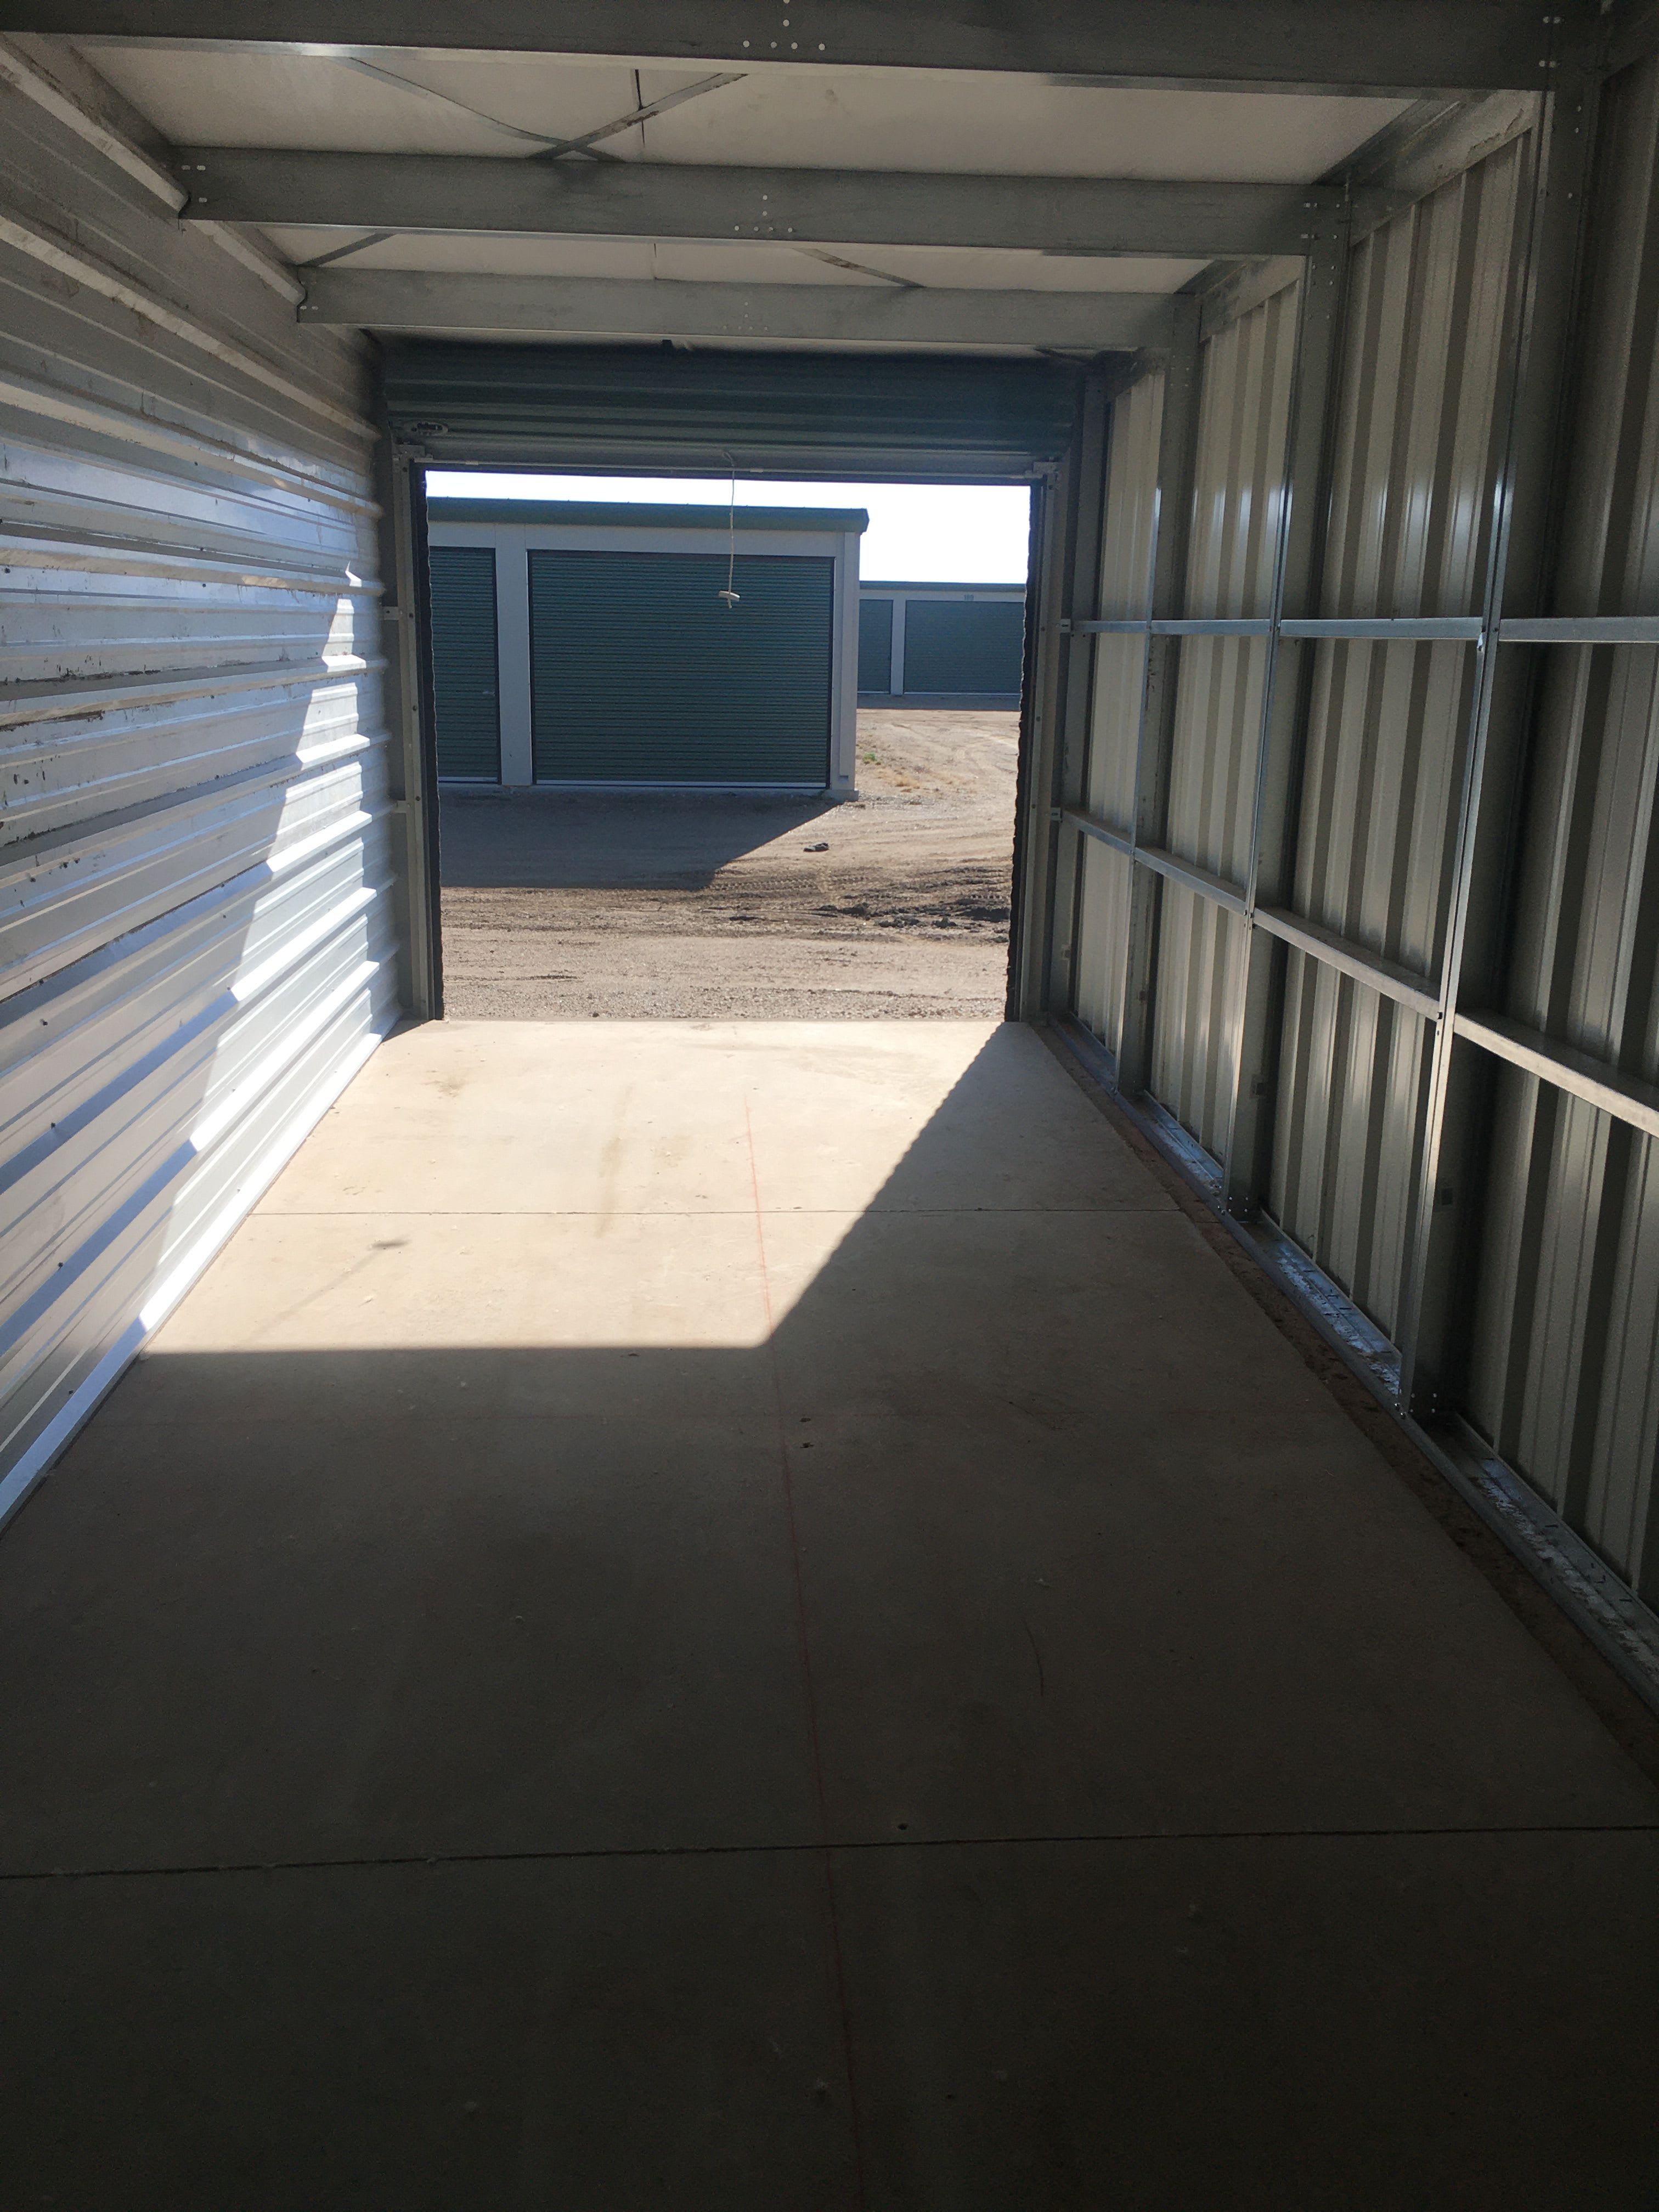 Learn more about storage options at KO Storage in Aberdeen, South Dakota